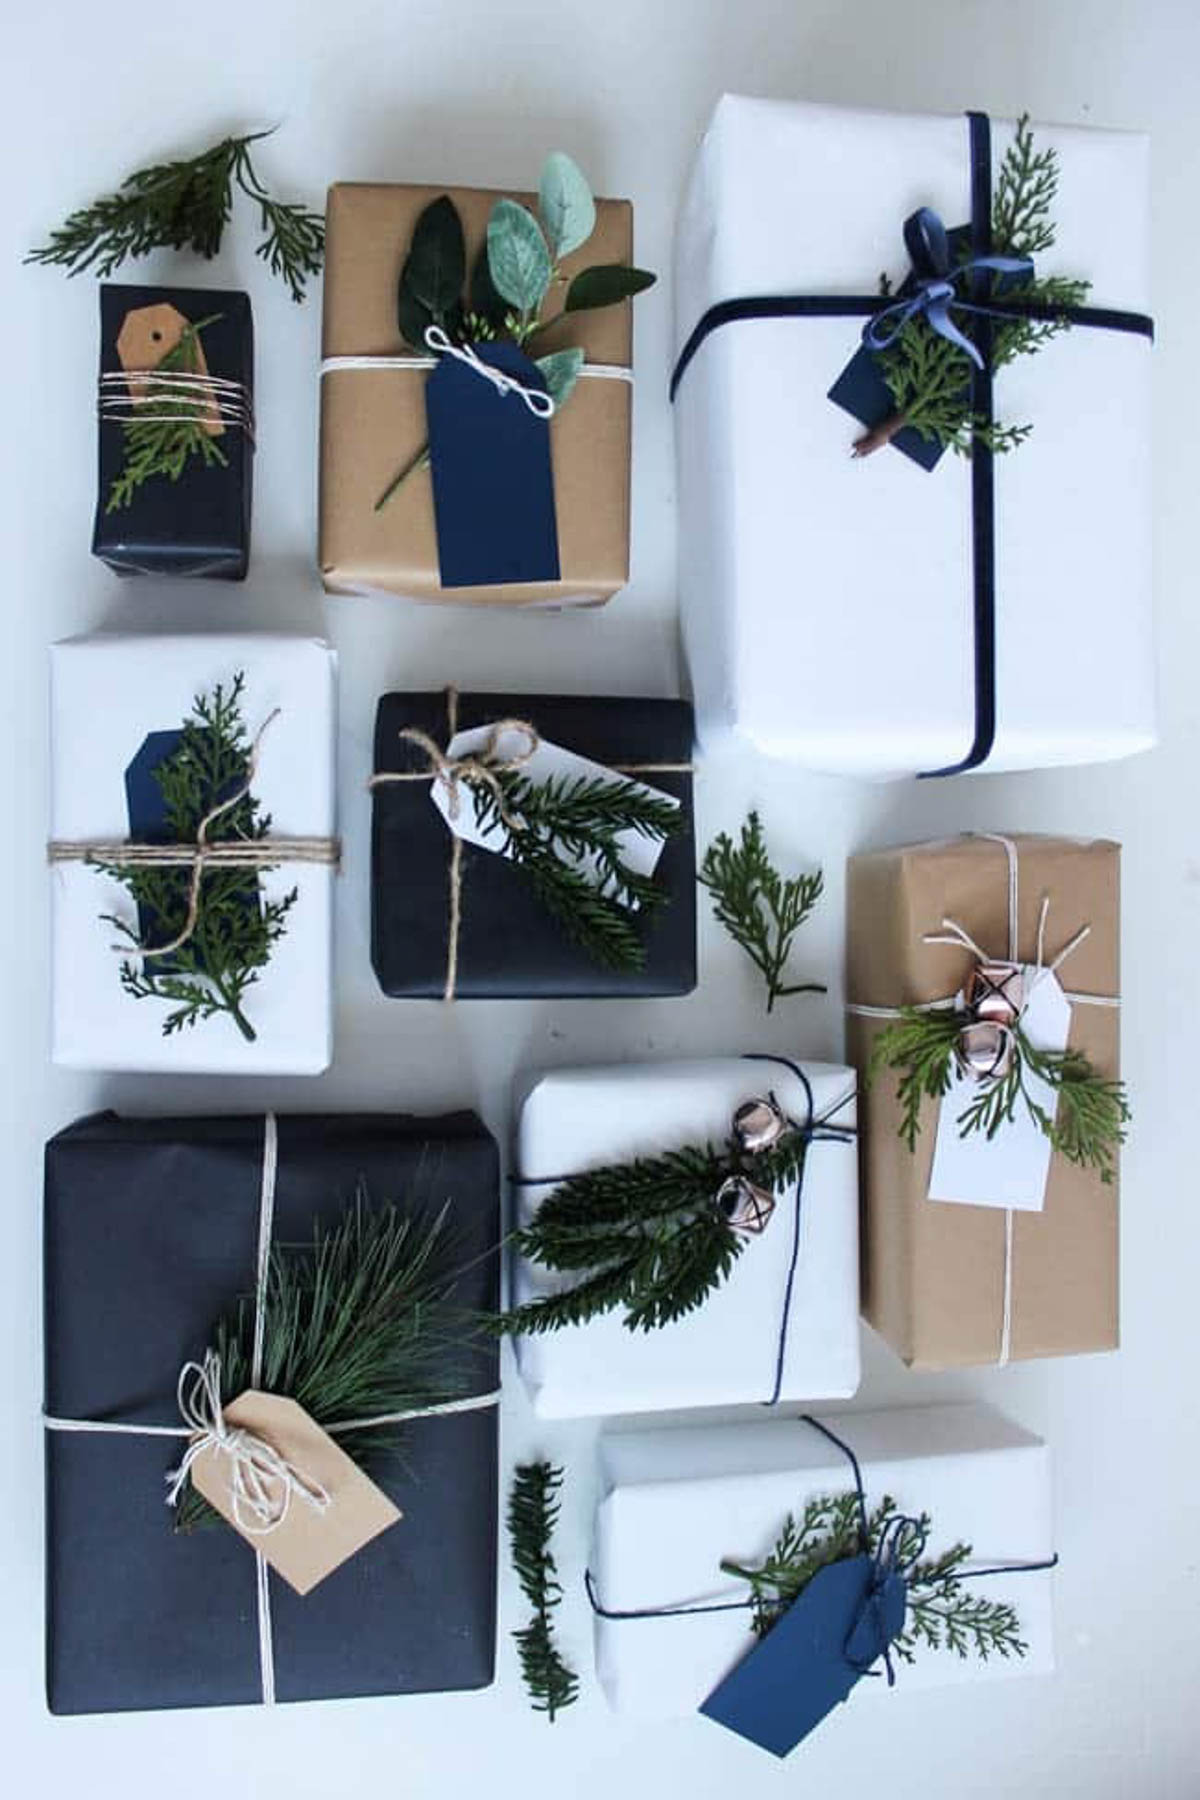 Collection of boxes wrapped in DIY gift wrap.